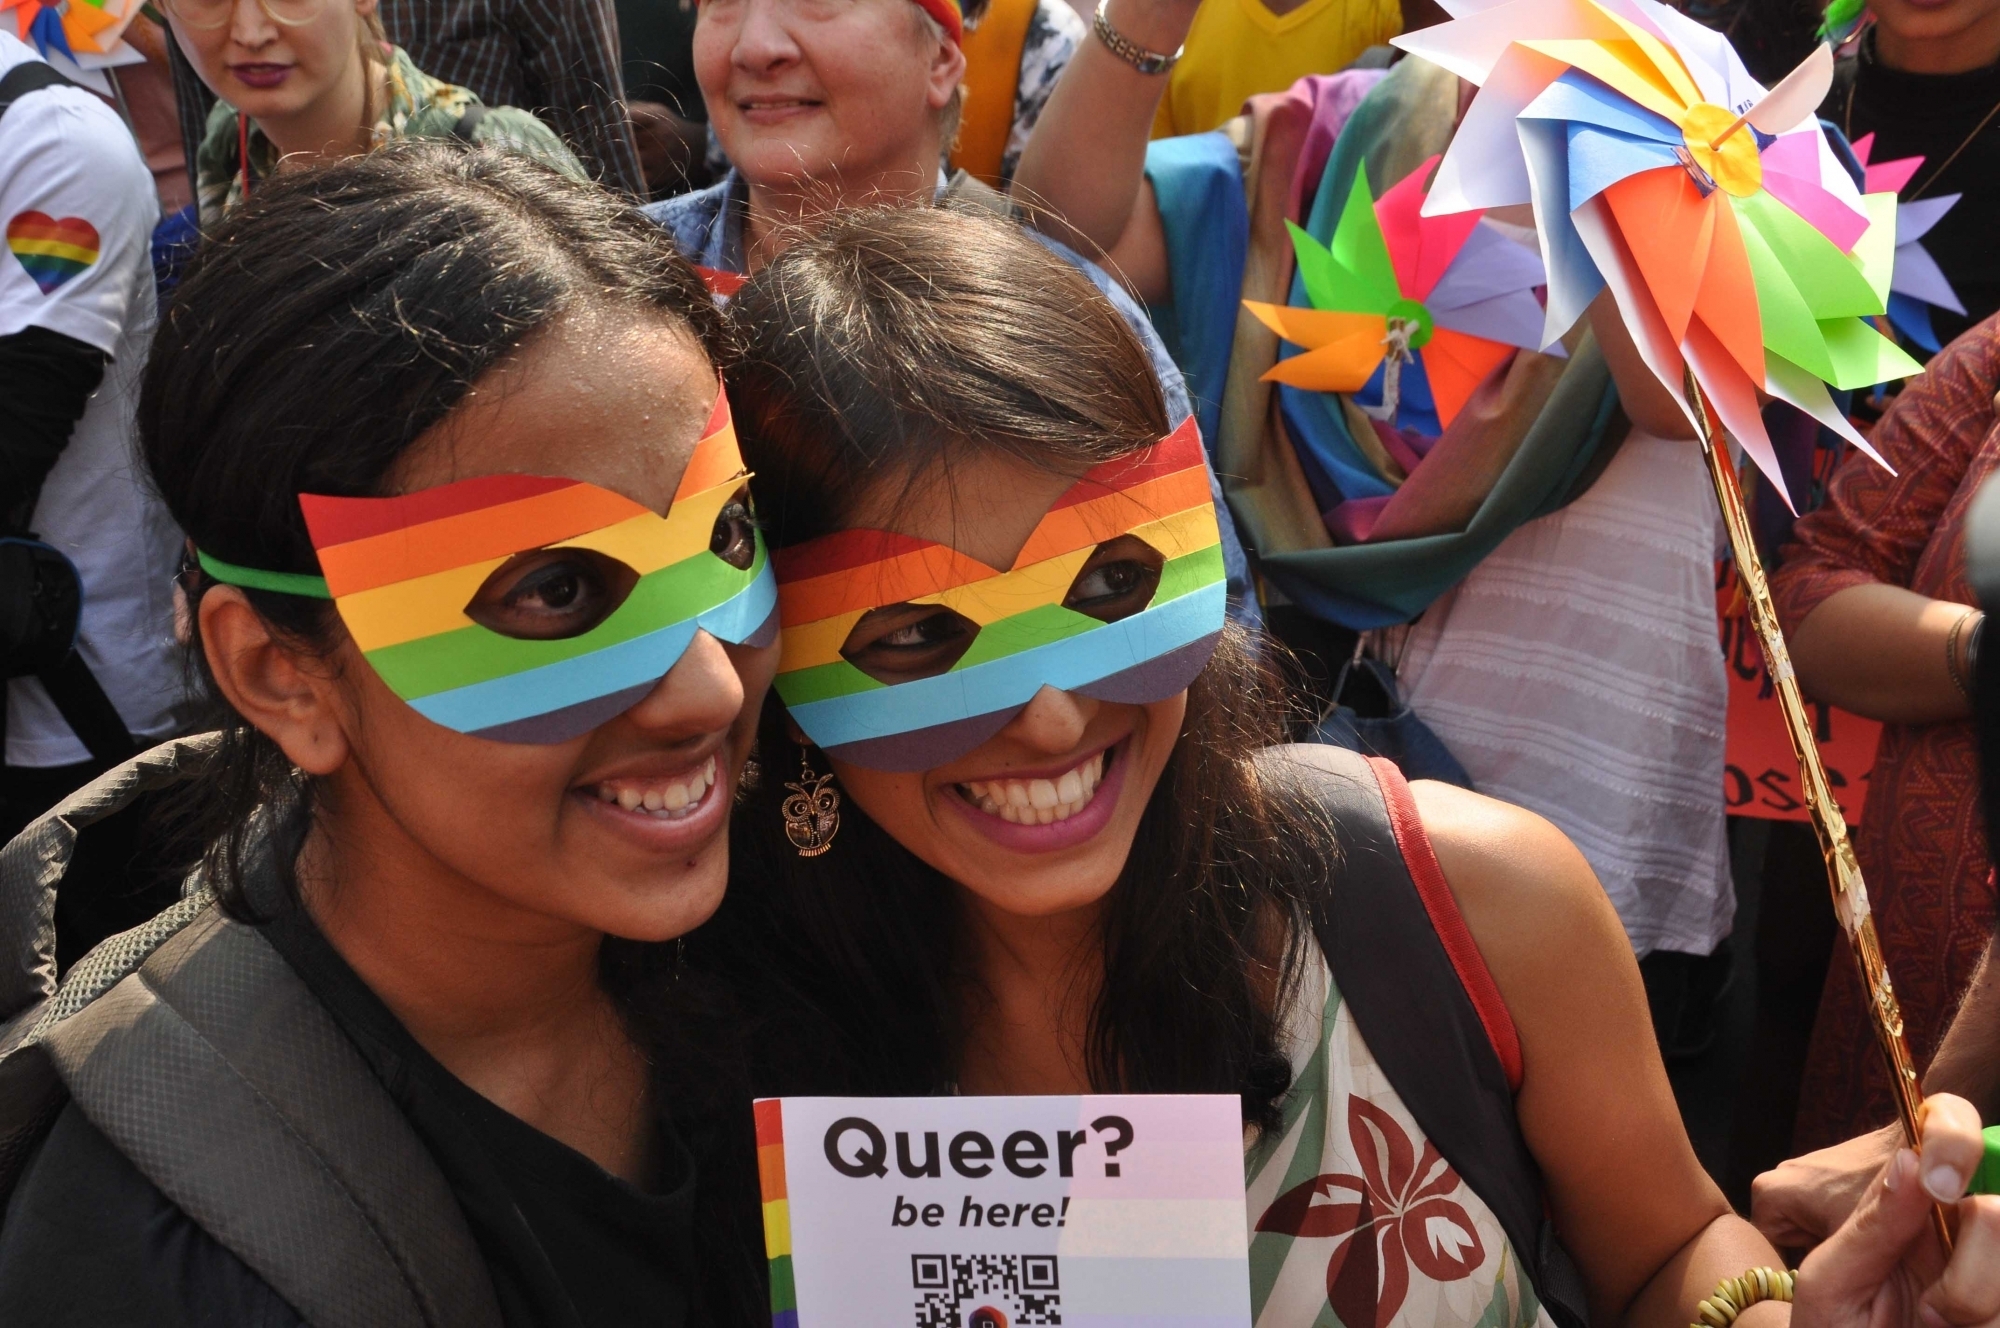 Delhi HC directs police protection for Lesbian married 